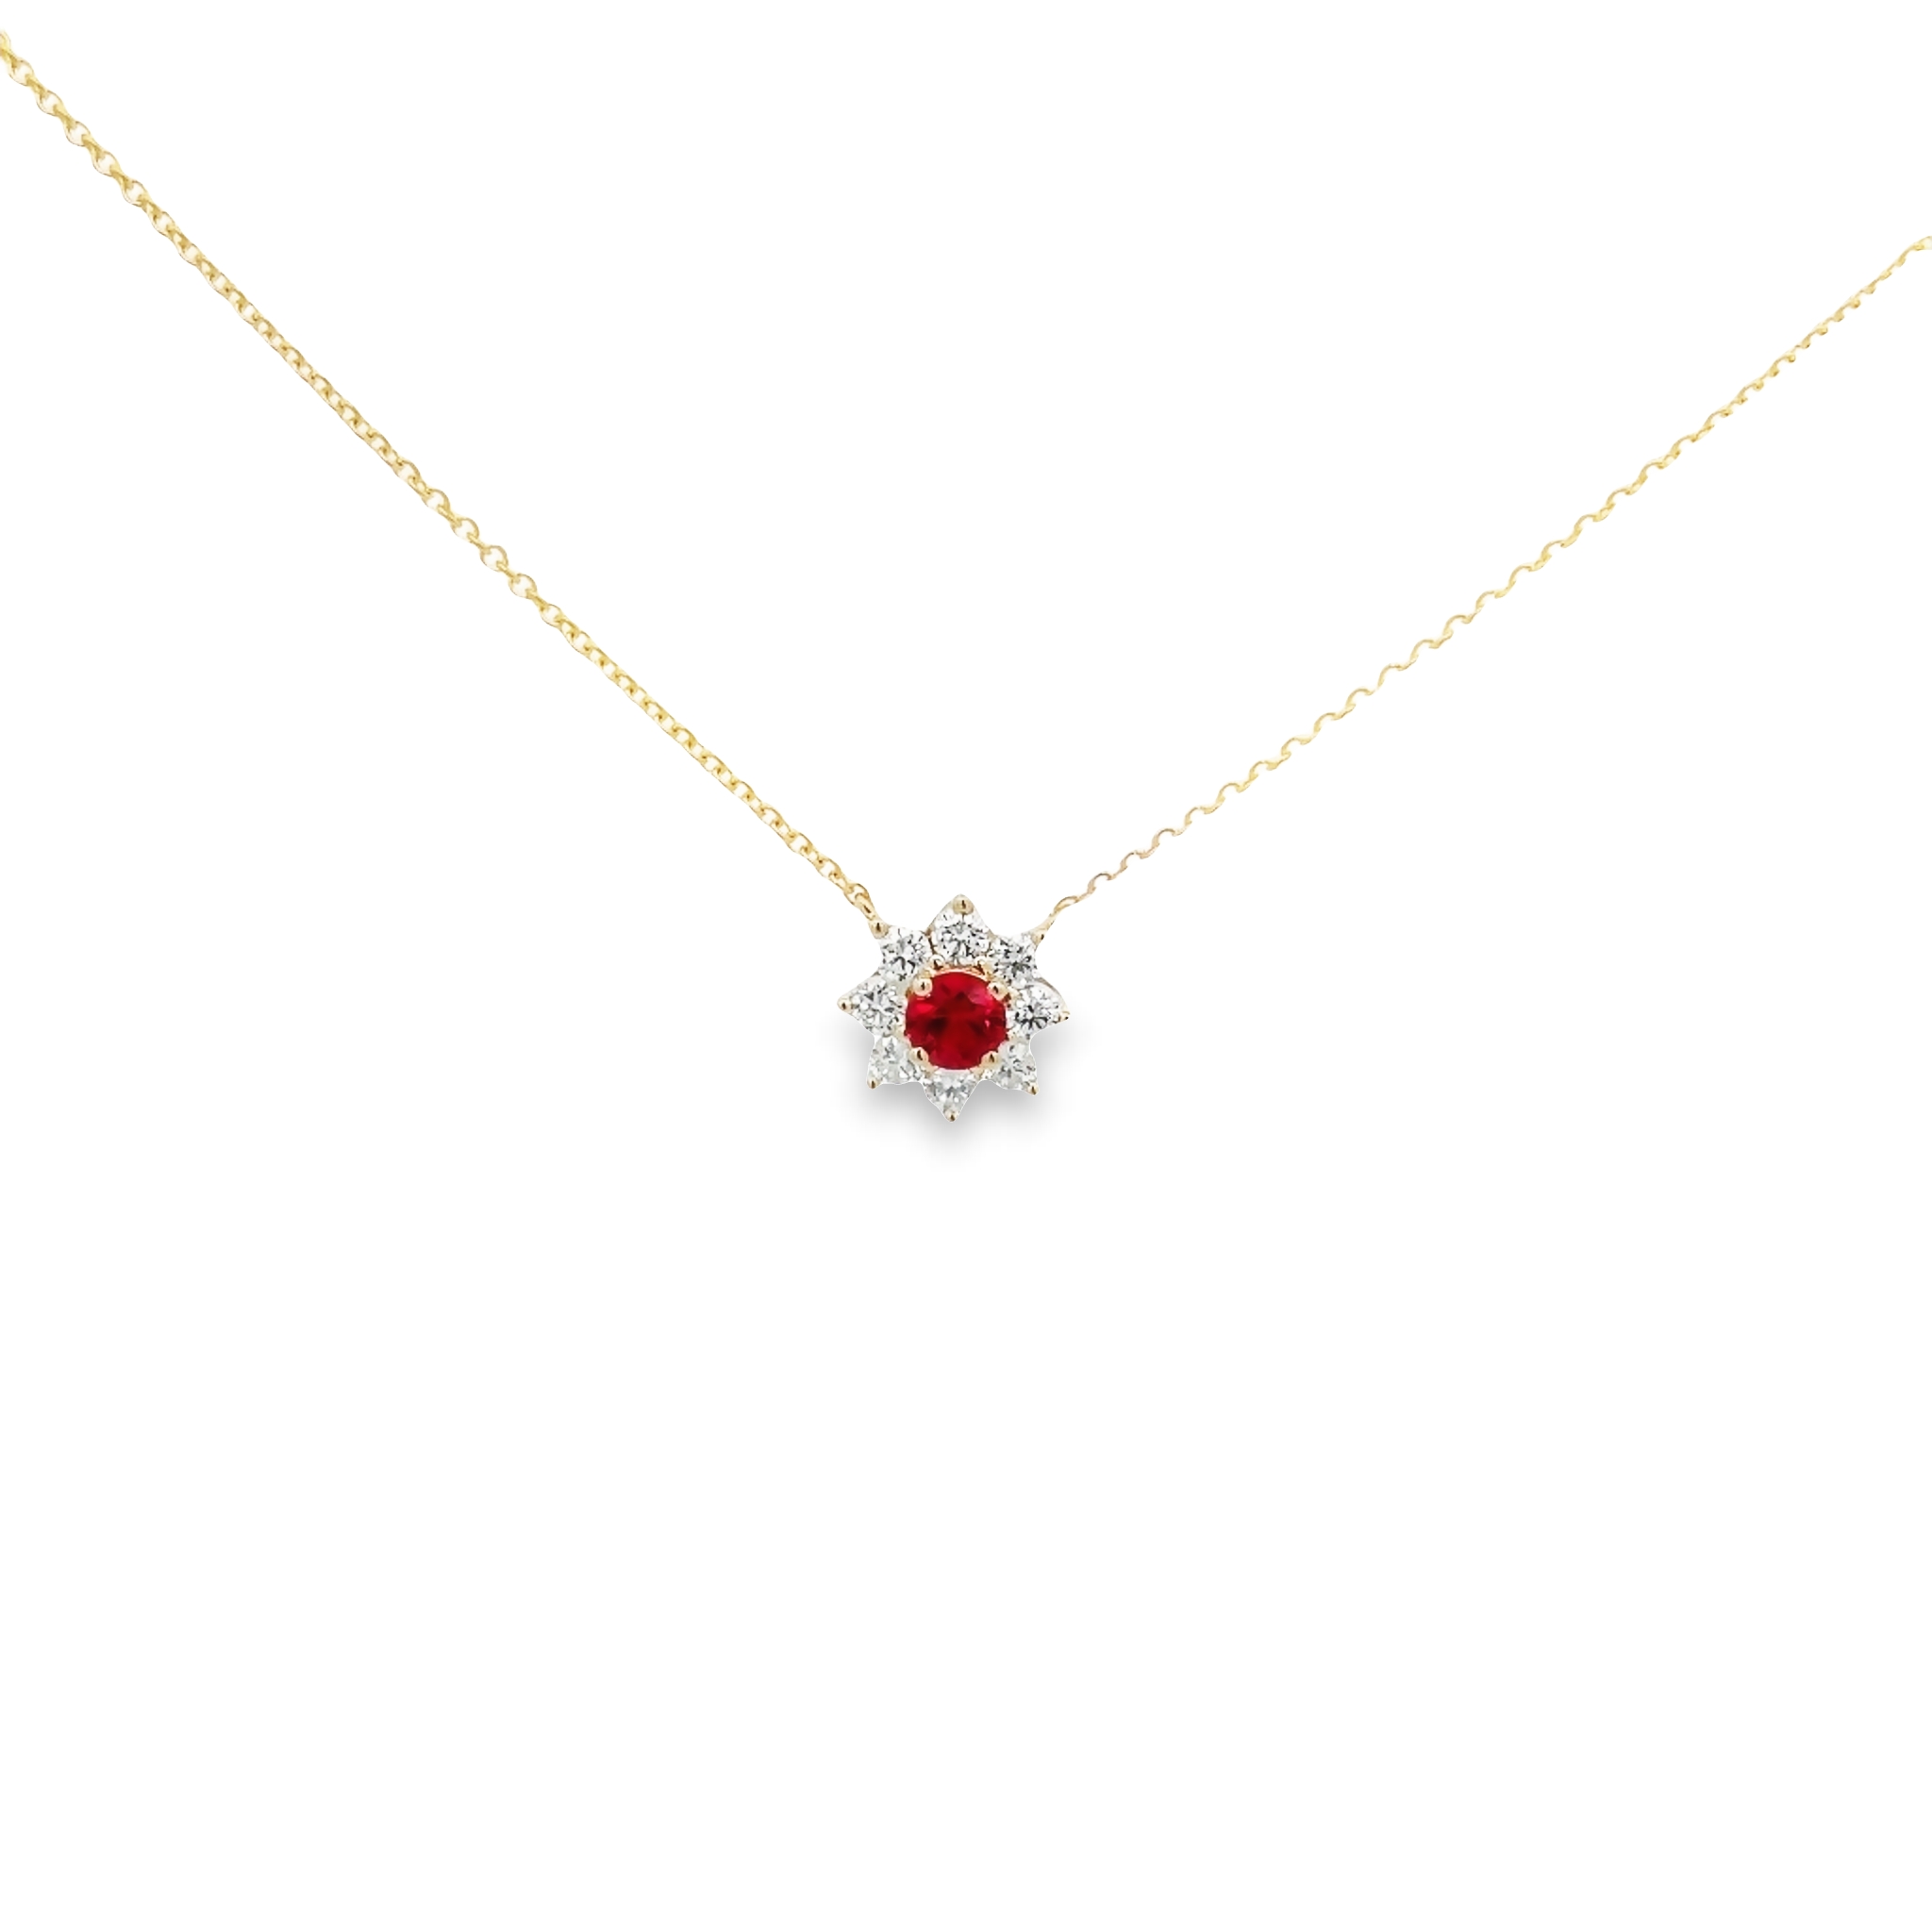 14 karat yellow gold pendant with one 0.48ct round mixed cut Ruby and 8=0.58 total weight round brilliant G VS Diamonds